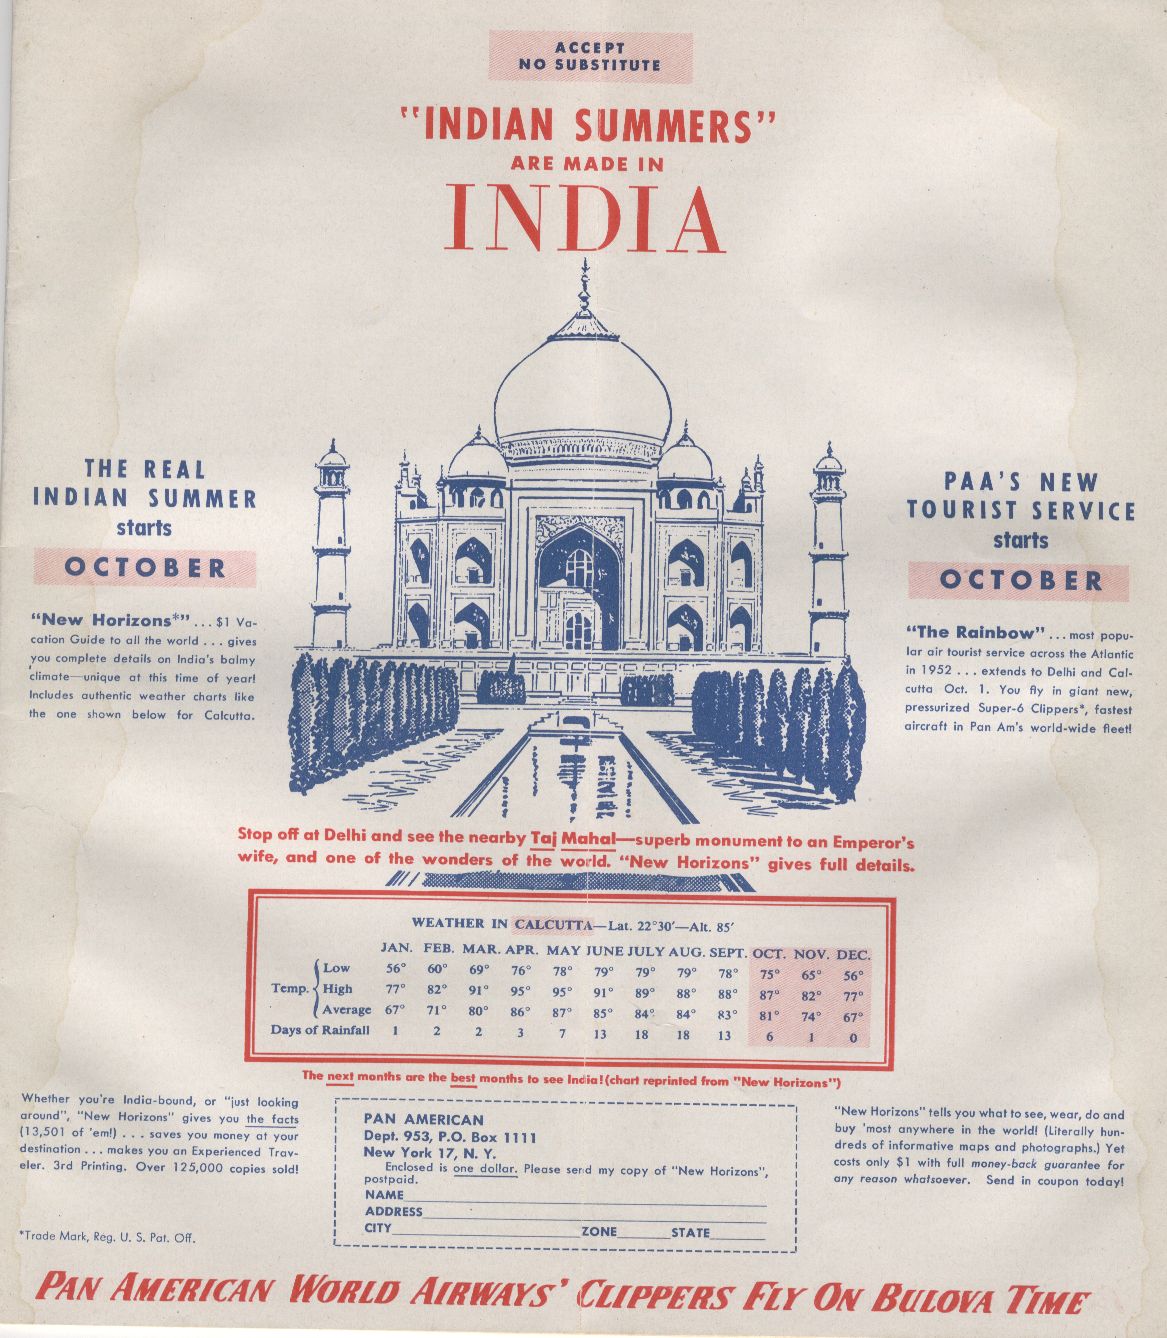 1953, September, A Pan American timetable ad promoting India.